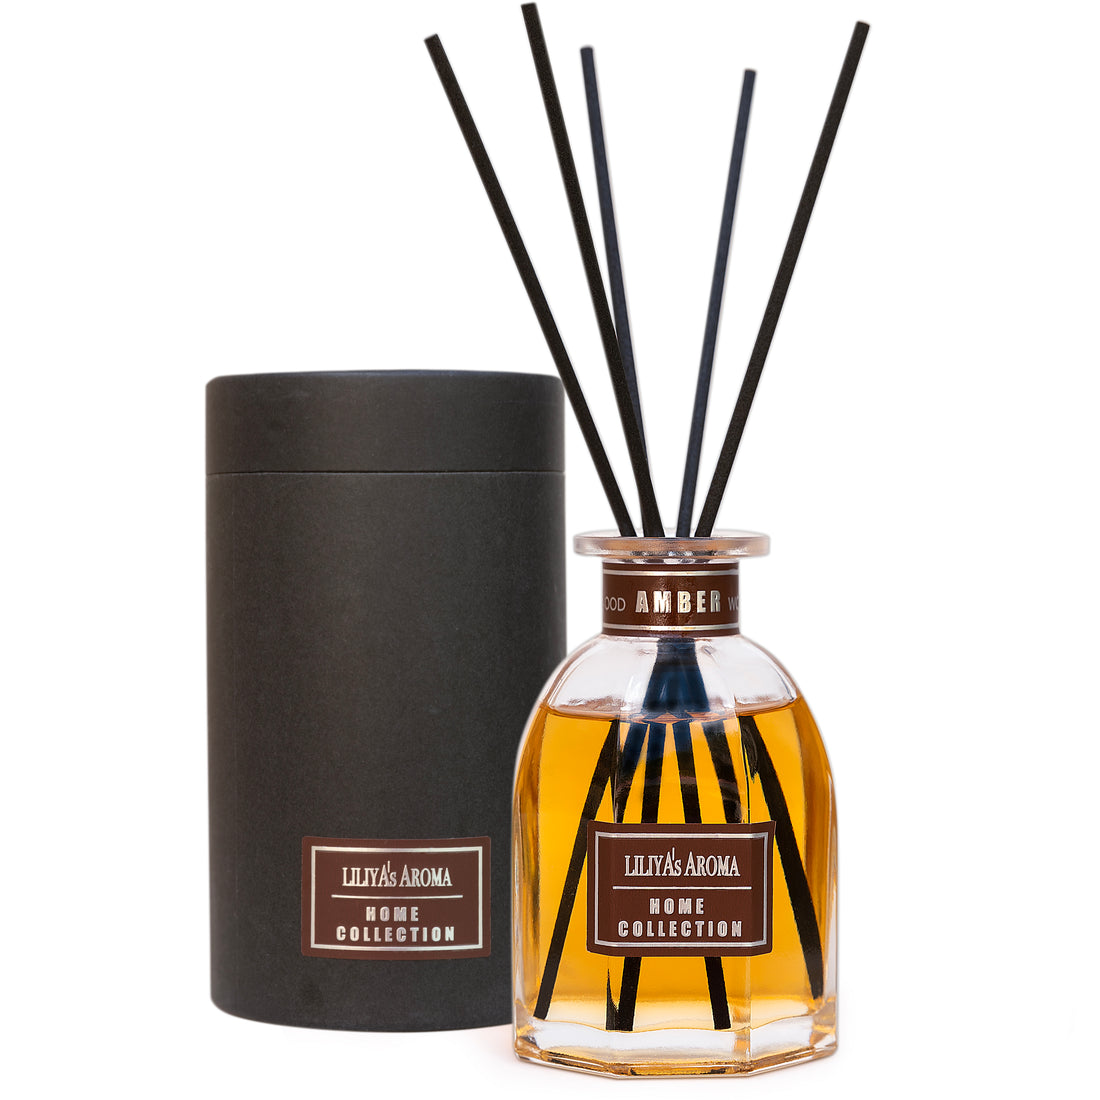 Liliya’s Aroma Reed Diffuser Amber Wood, Home Collection, Diffuser Scent of Sandalwood and Sweet Vanilla, Diffuser Set 5 oz |150 ml